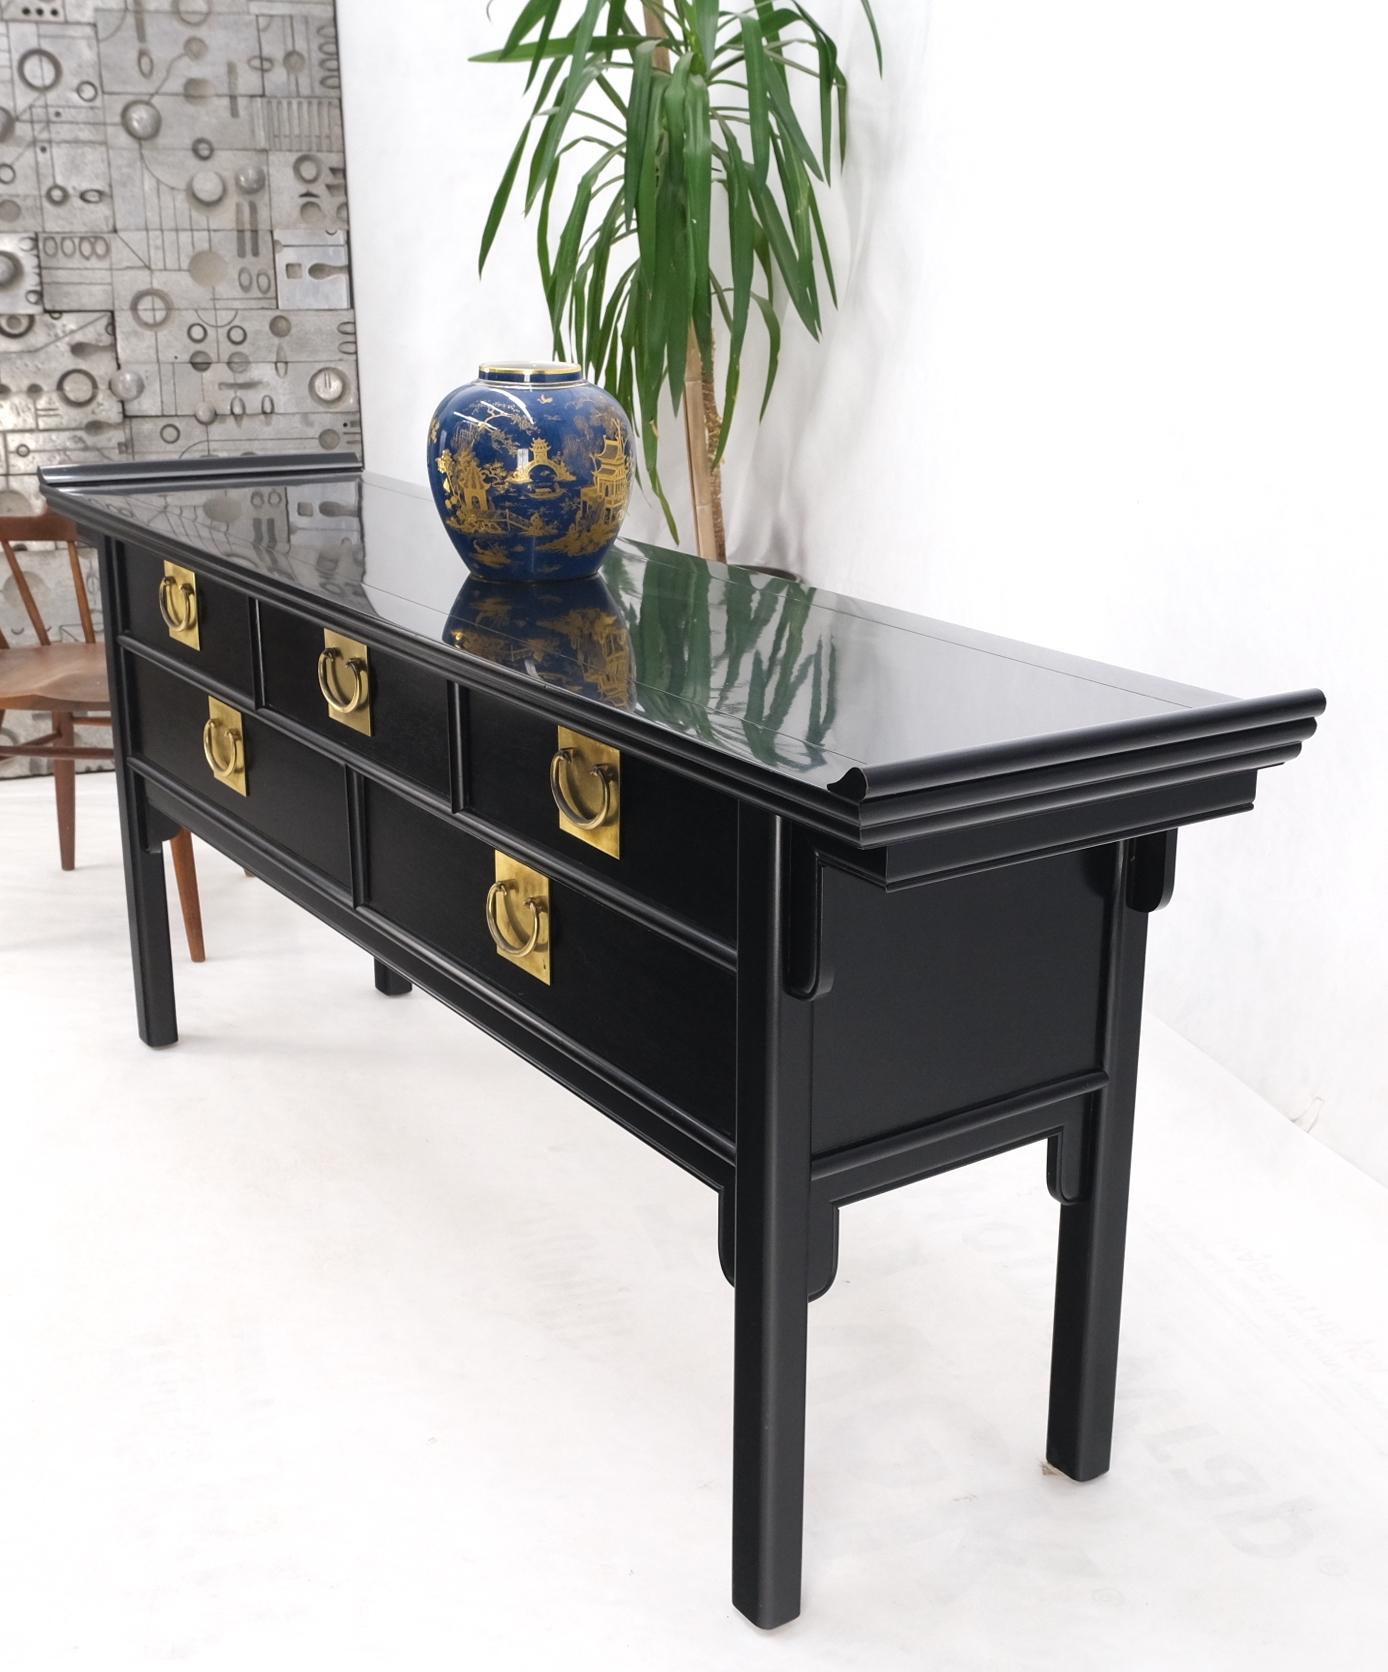 Black lacquer brass hardware 5 drawers oriental long credenza console table mint.